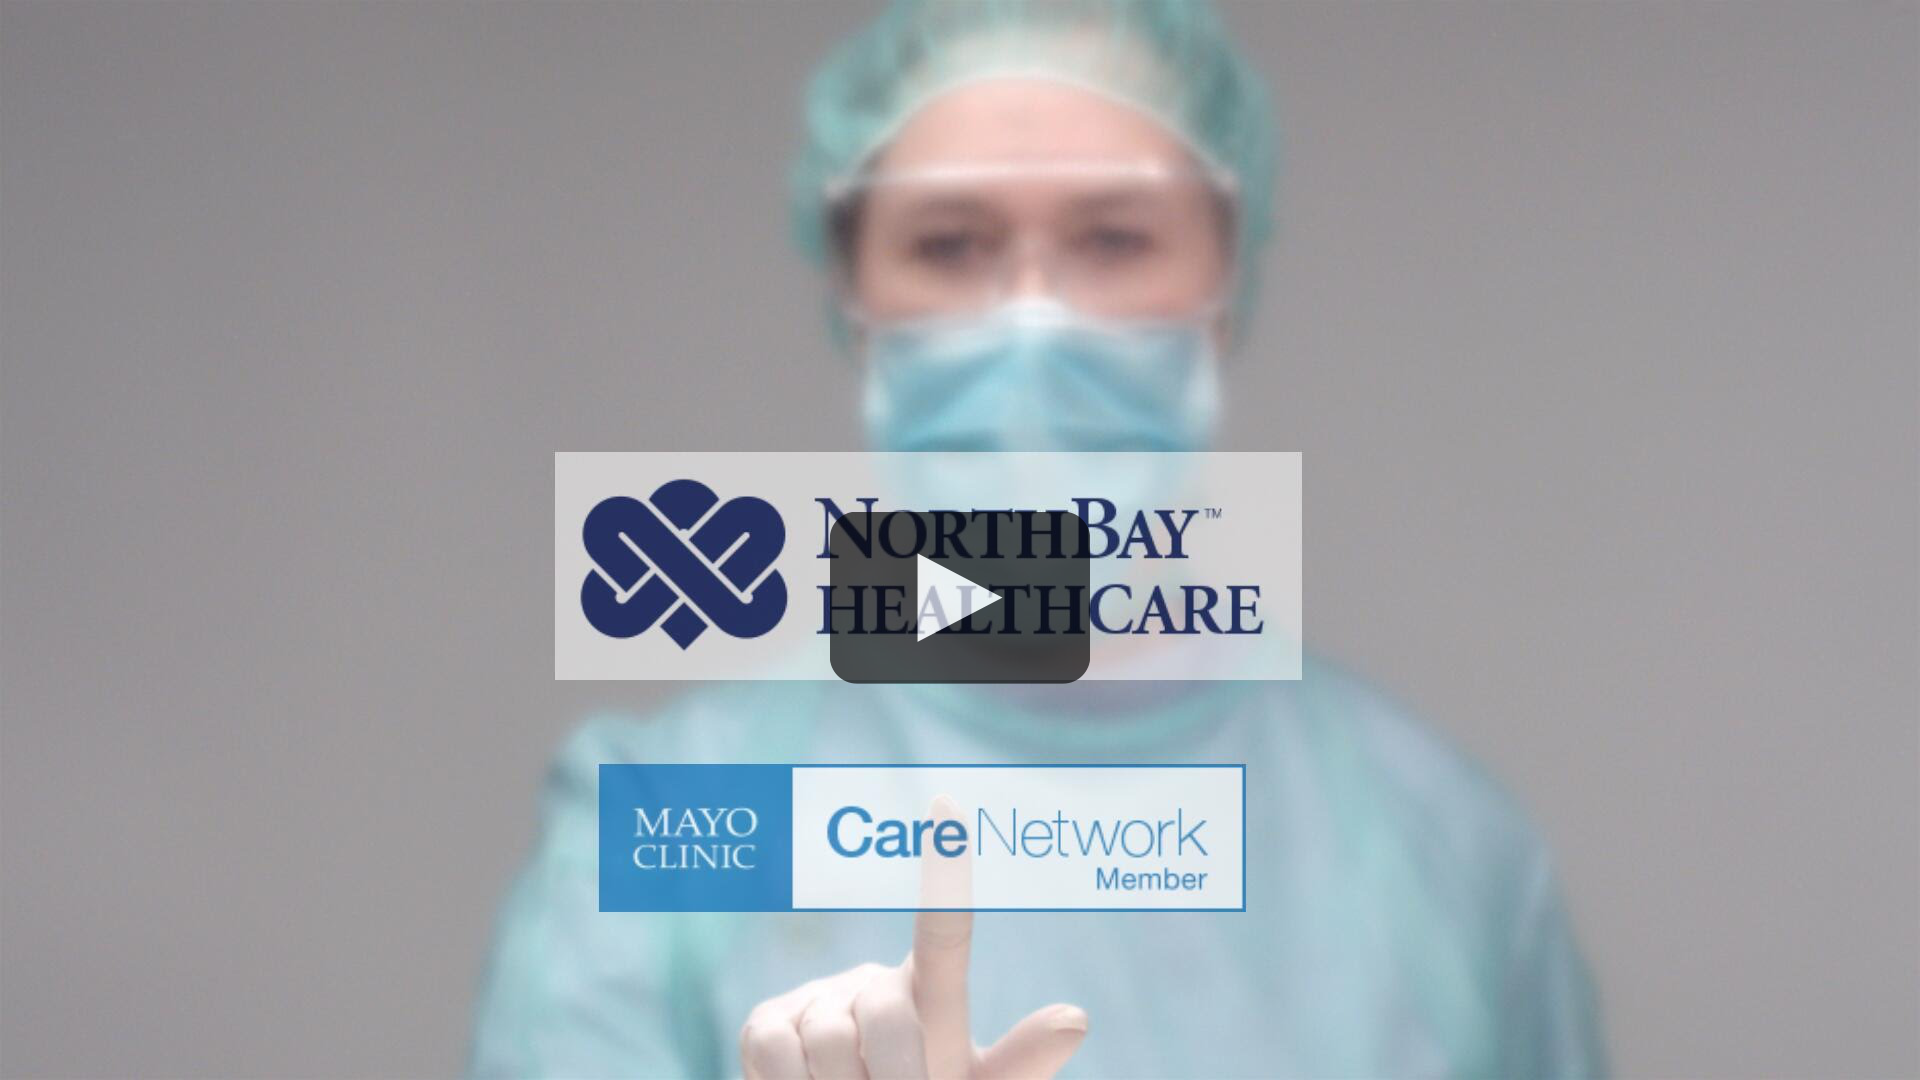 Image of a female surgeon pressing her finger to the screen where both the Mayo Clinic Care Network and NorthBay Healthcare logos are shown.